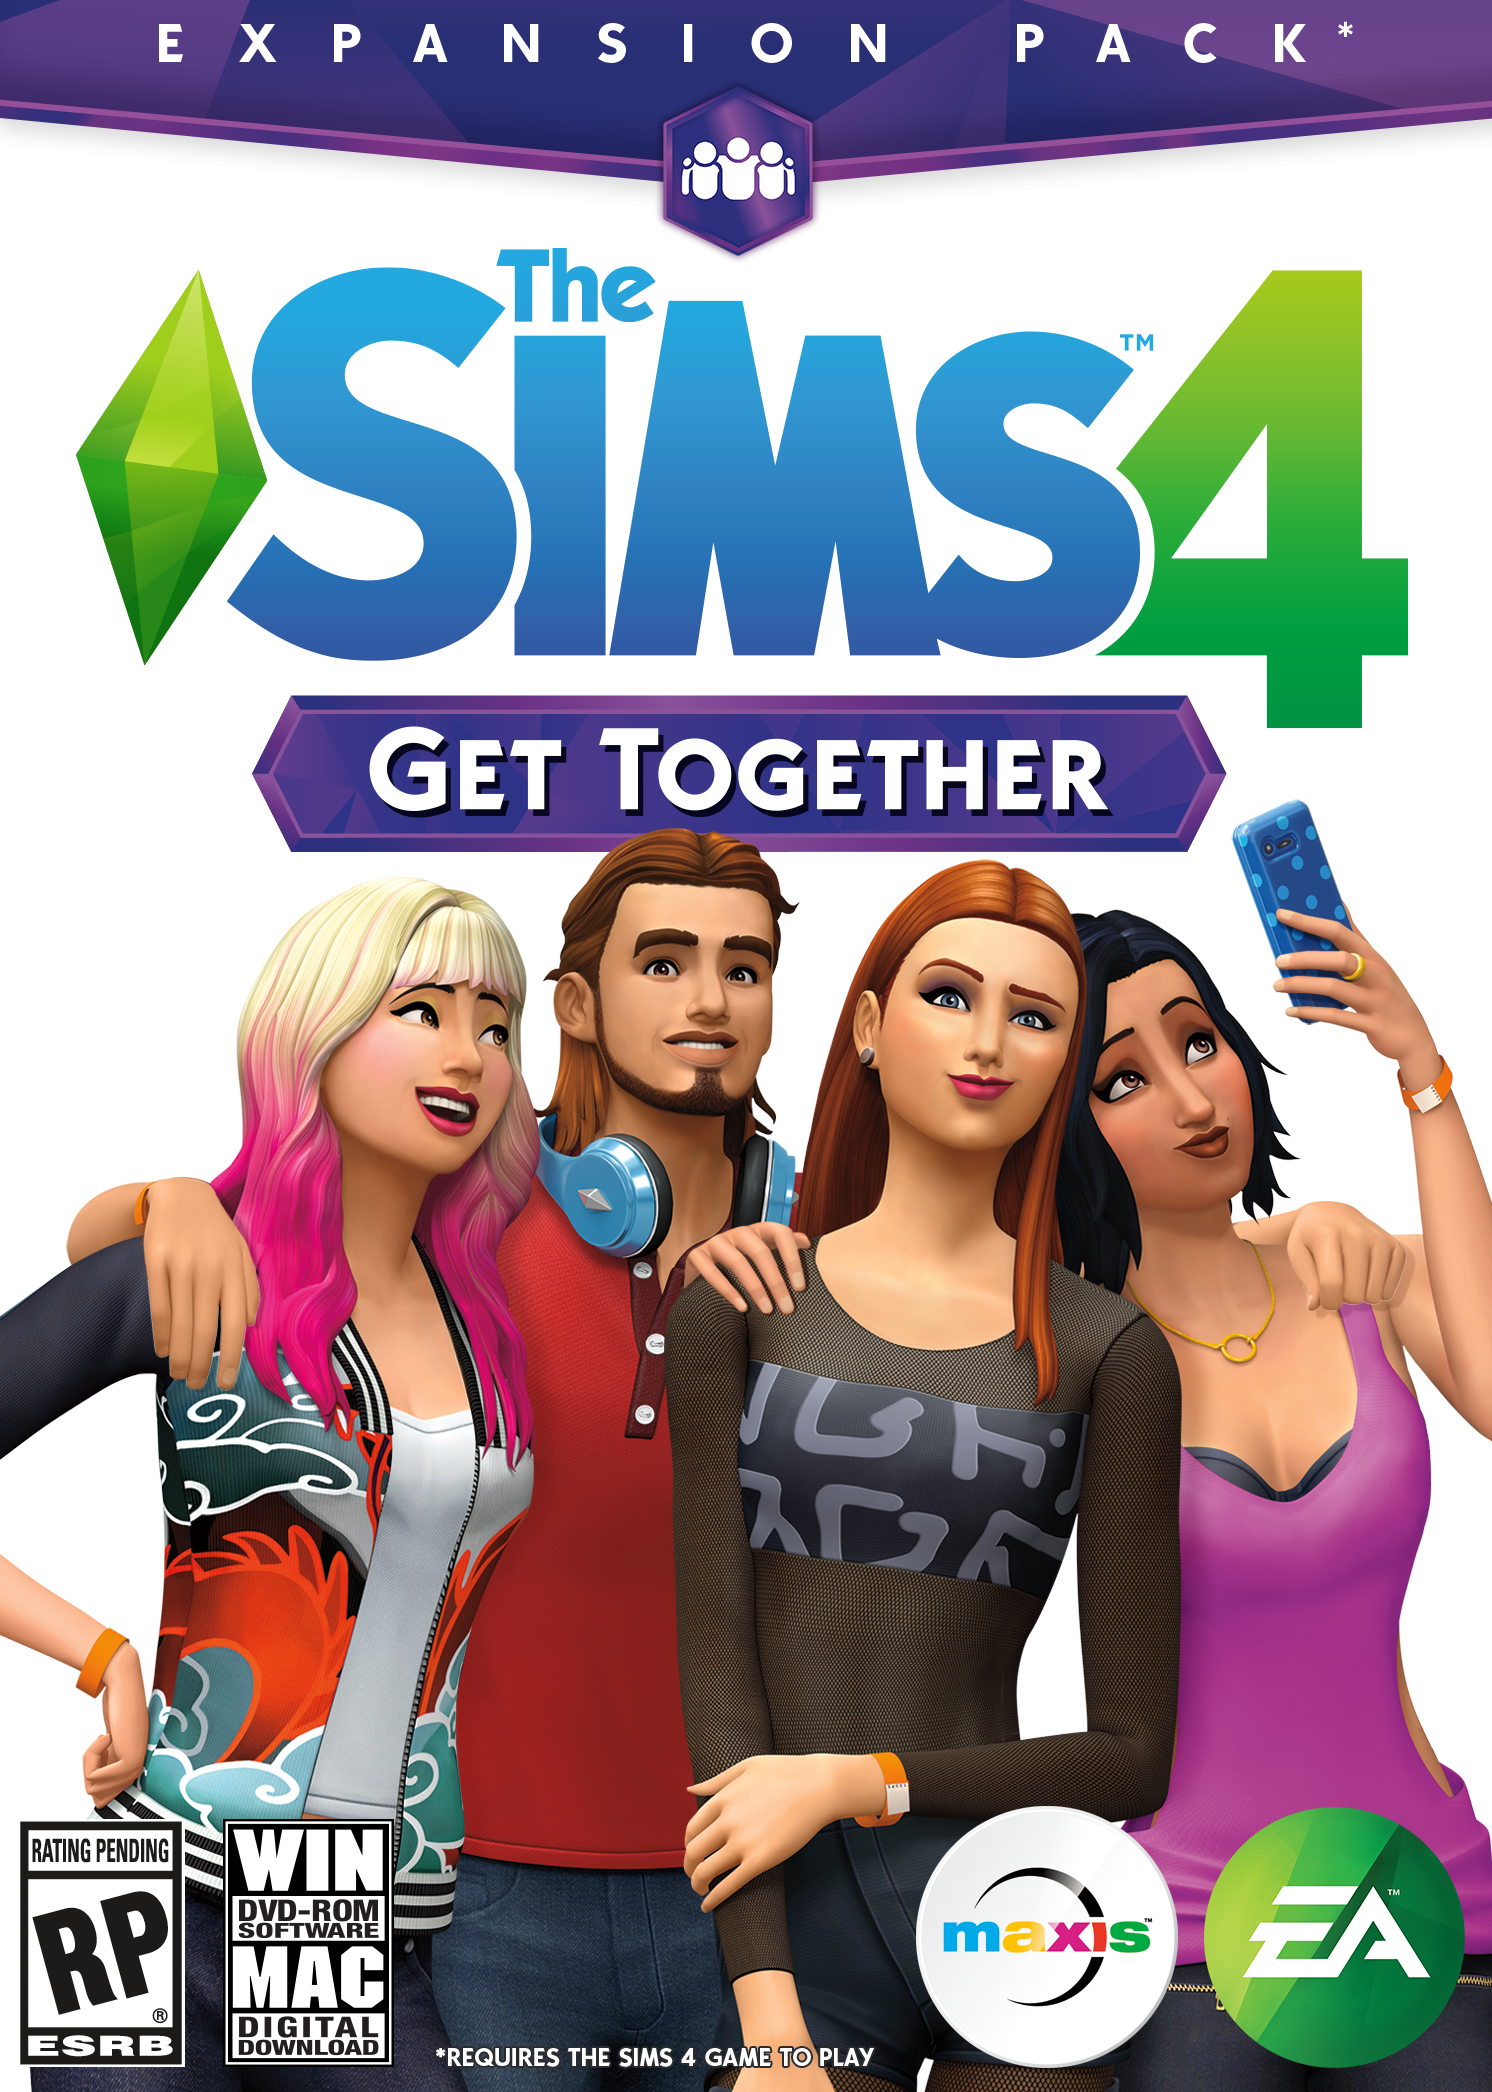 The Sims 4 Get Together indir